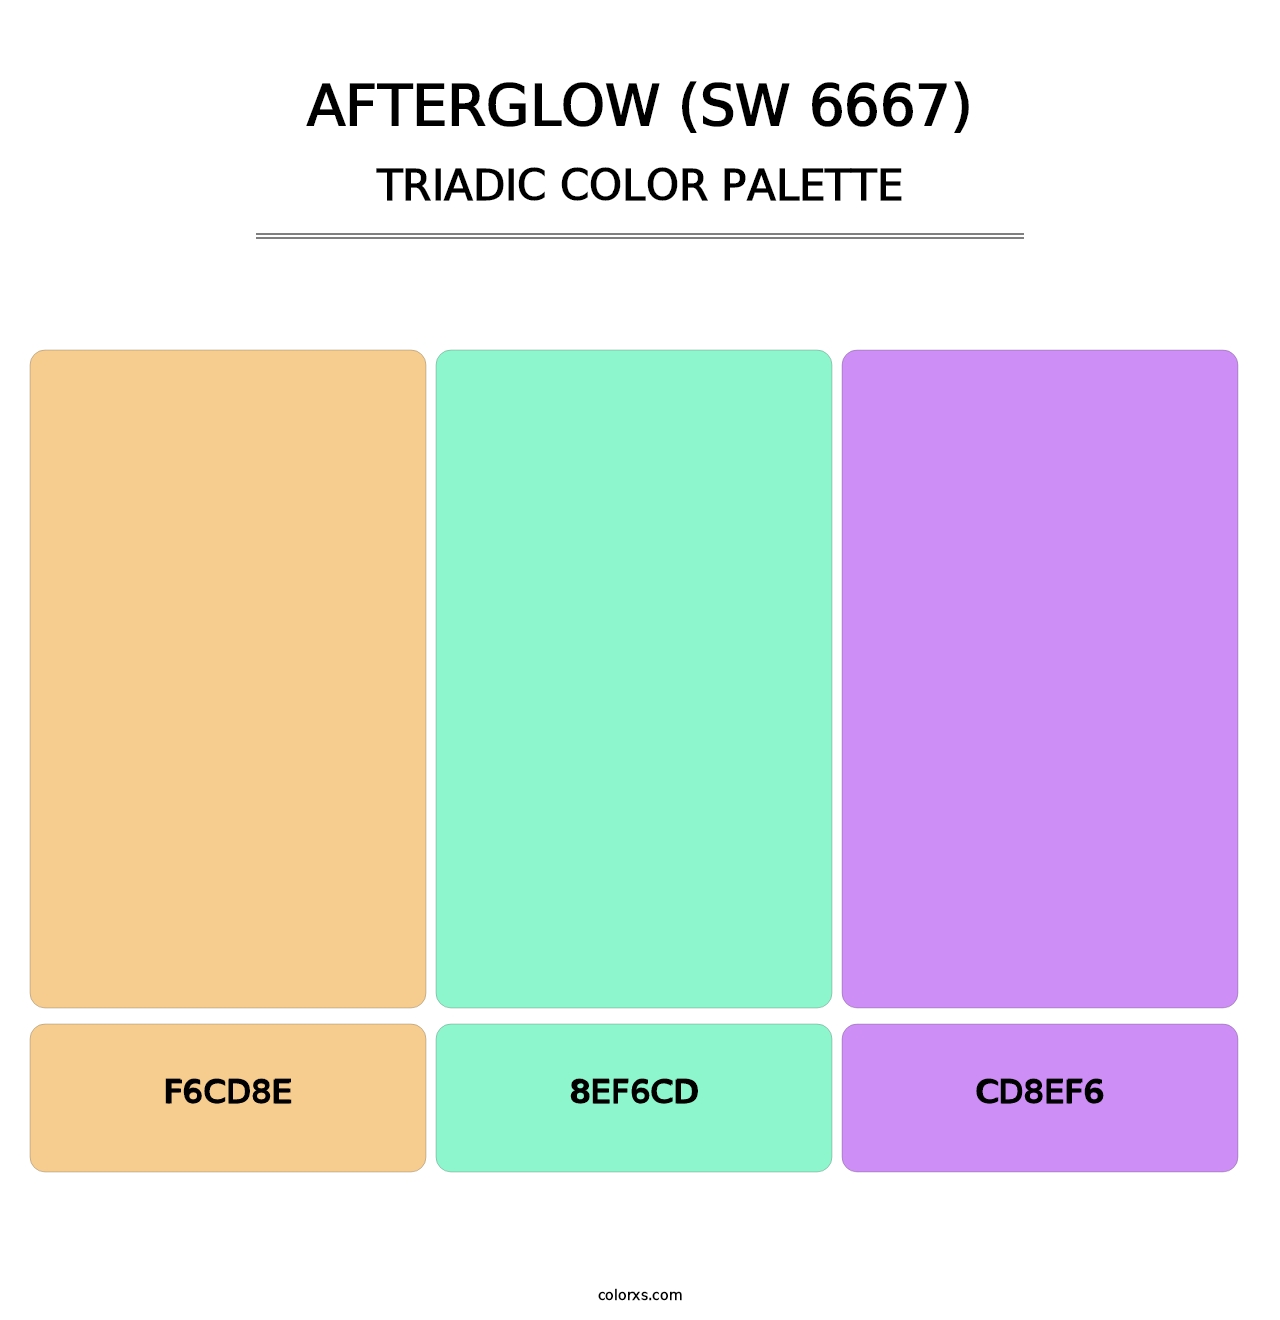 Afterglow (SW 6667) - Triadic Color Palette